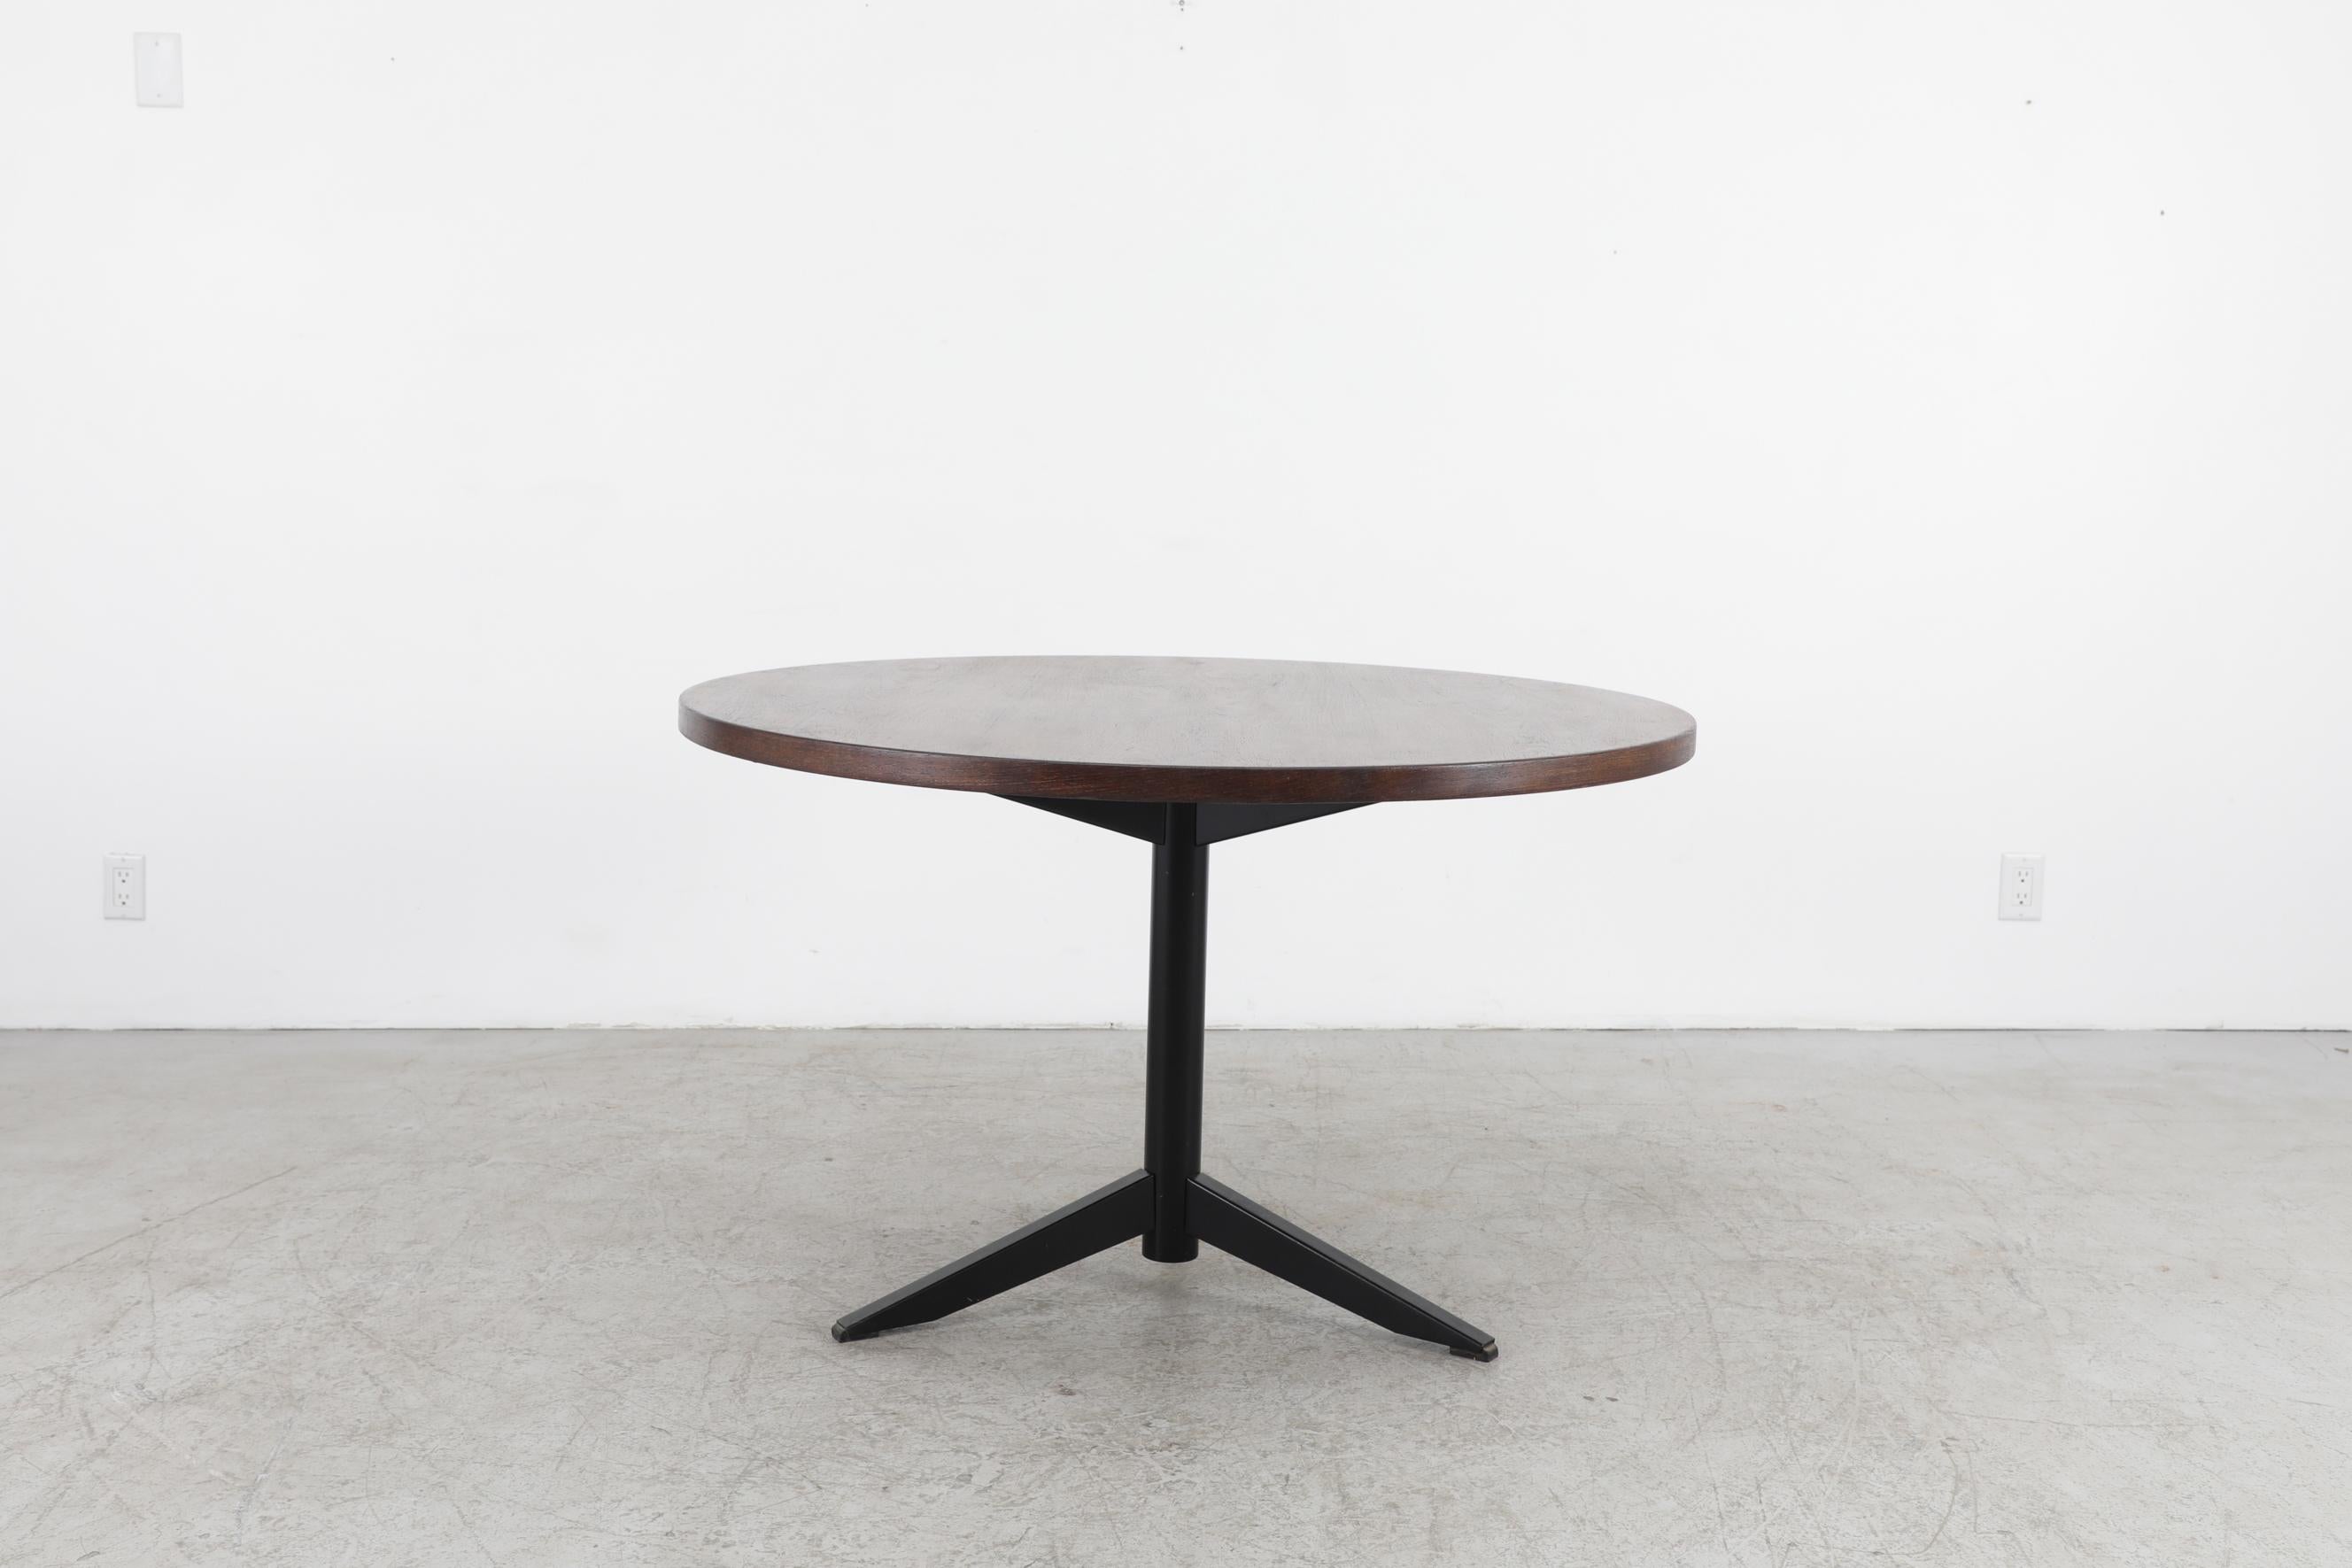 Designed by Martin Visser for 't Spectrum in 1960, the Model TE06 is a timeless design: A minimalist wenge dining table with black pedestal base where Visser's wish to make accessible furniture with as little material and as simple shapes once again